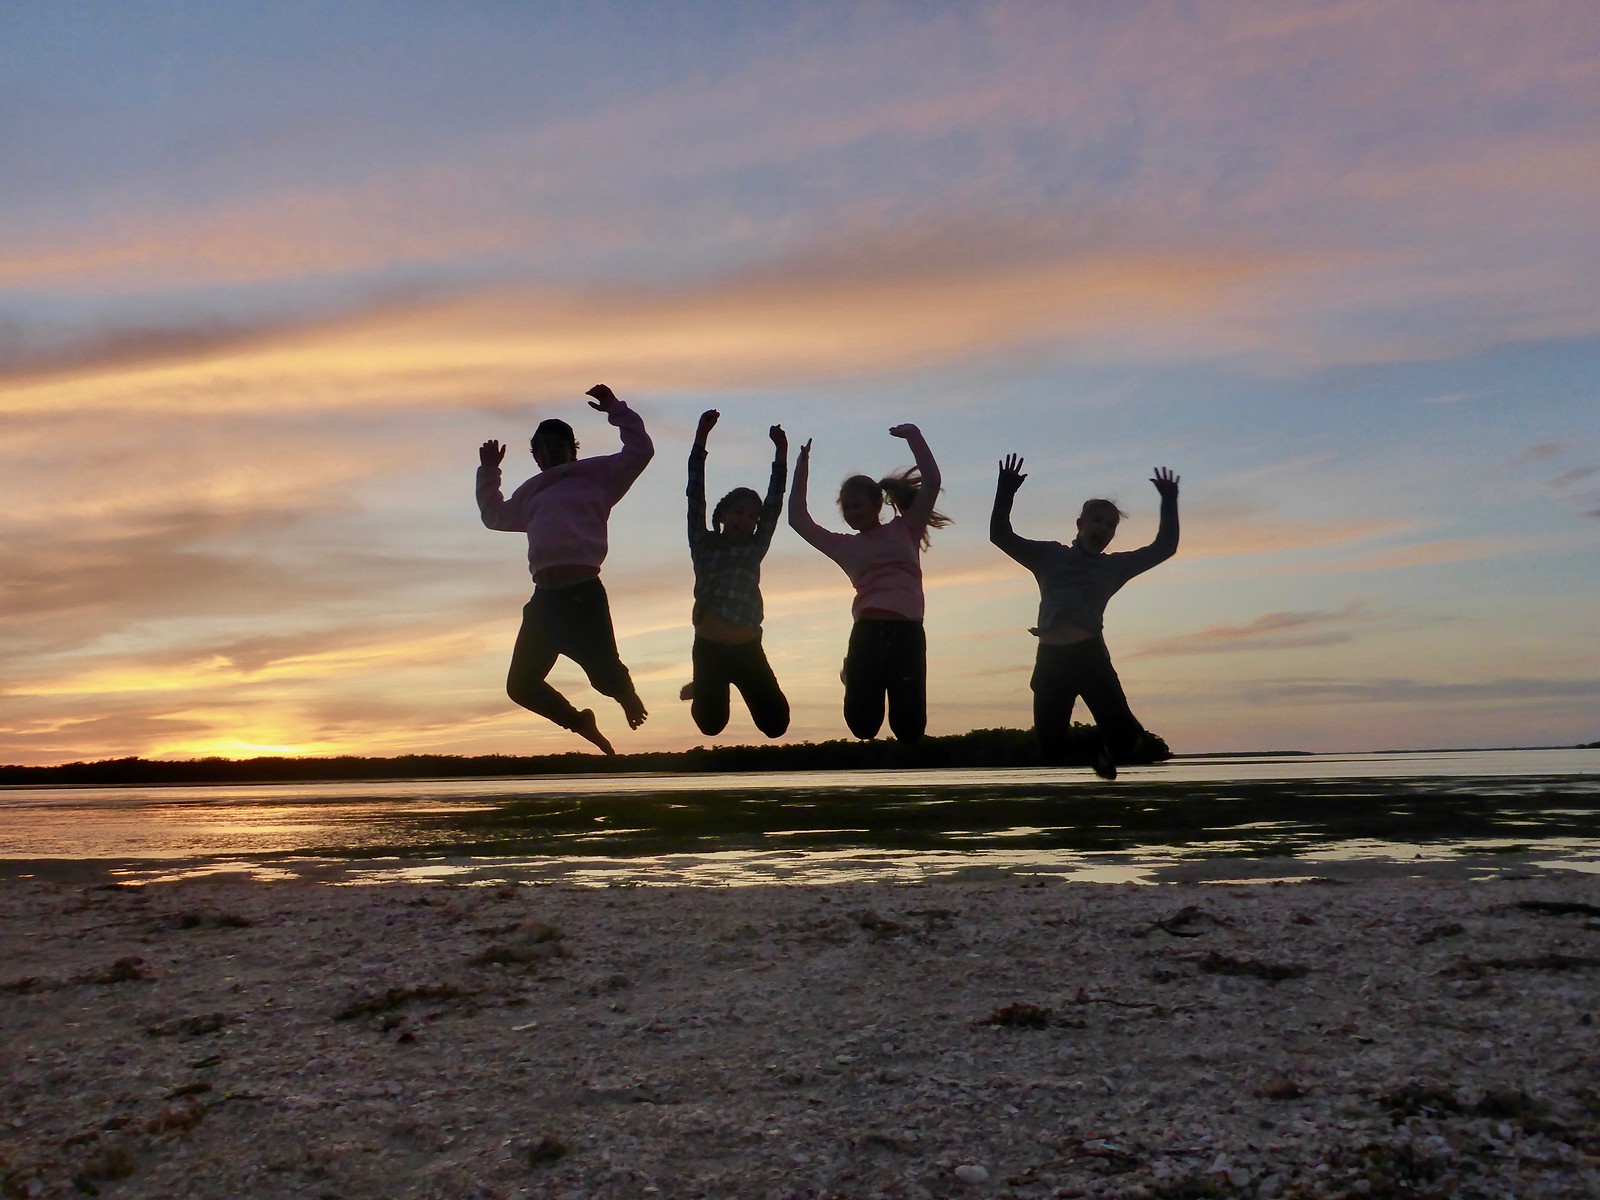 Paddlers jump for joy during a camping expedition to Picnic Island.